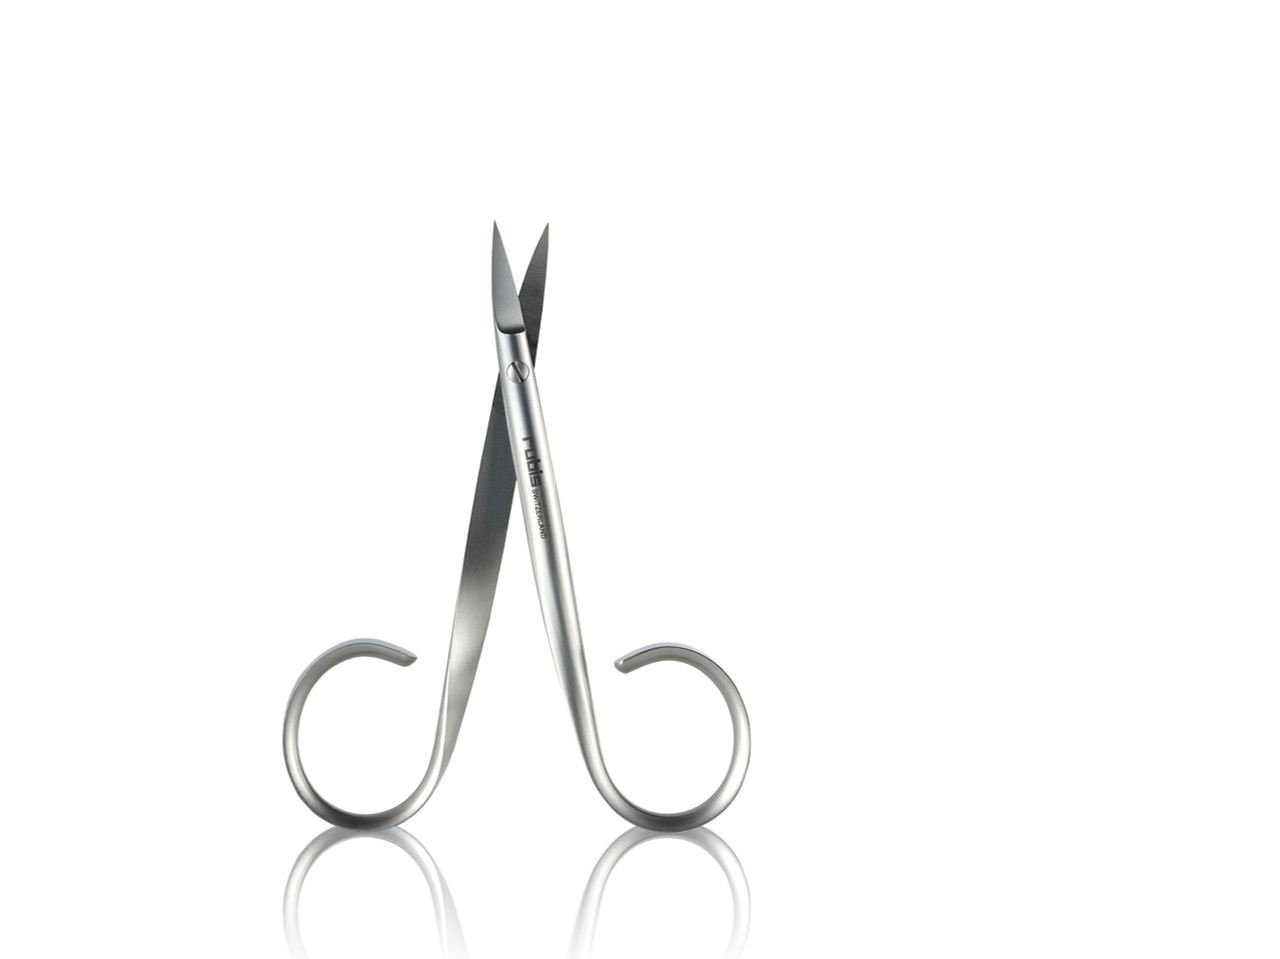 Beter Manicure Nail Scissors Curved Chromed, PharmacyClub